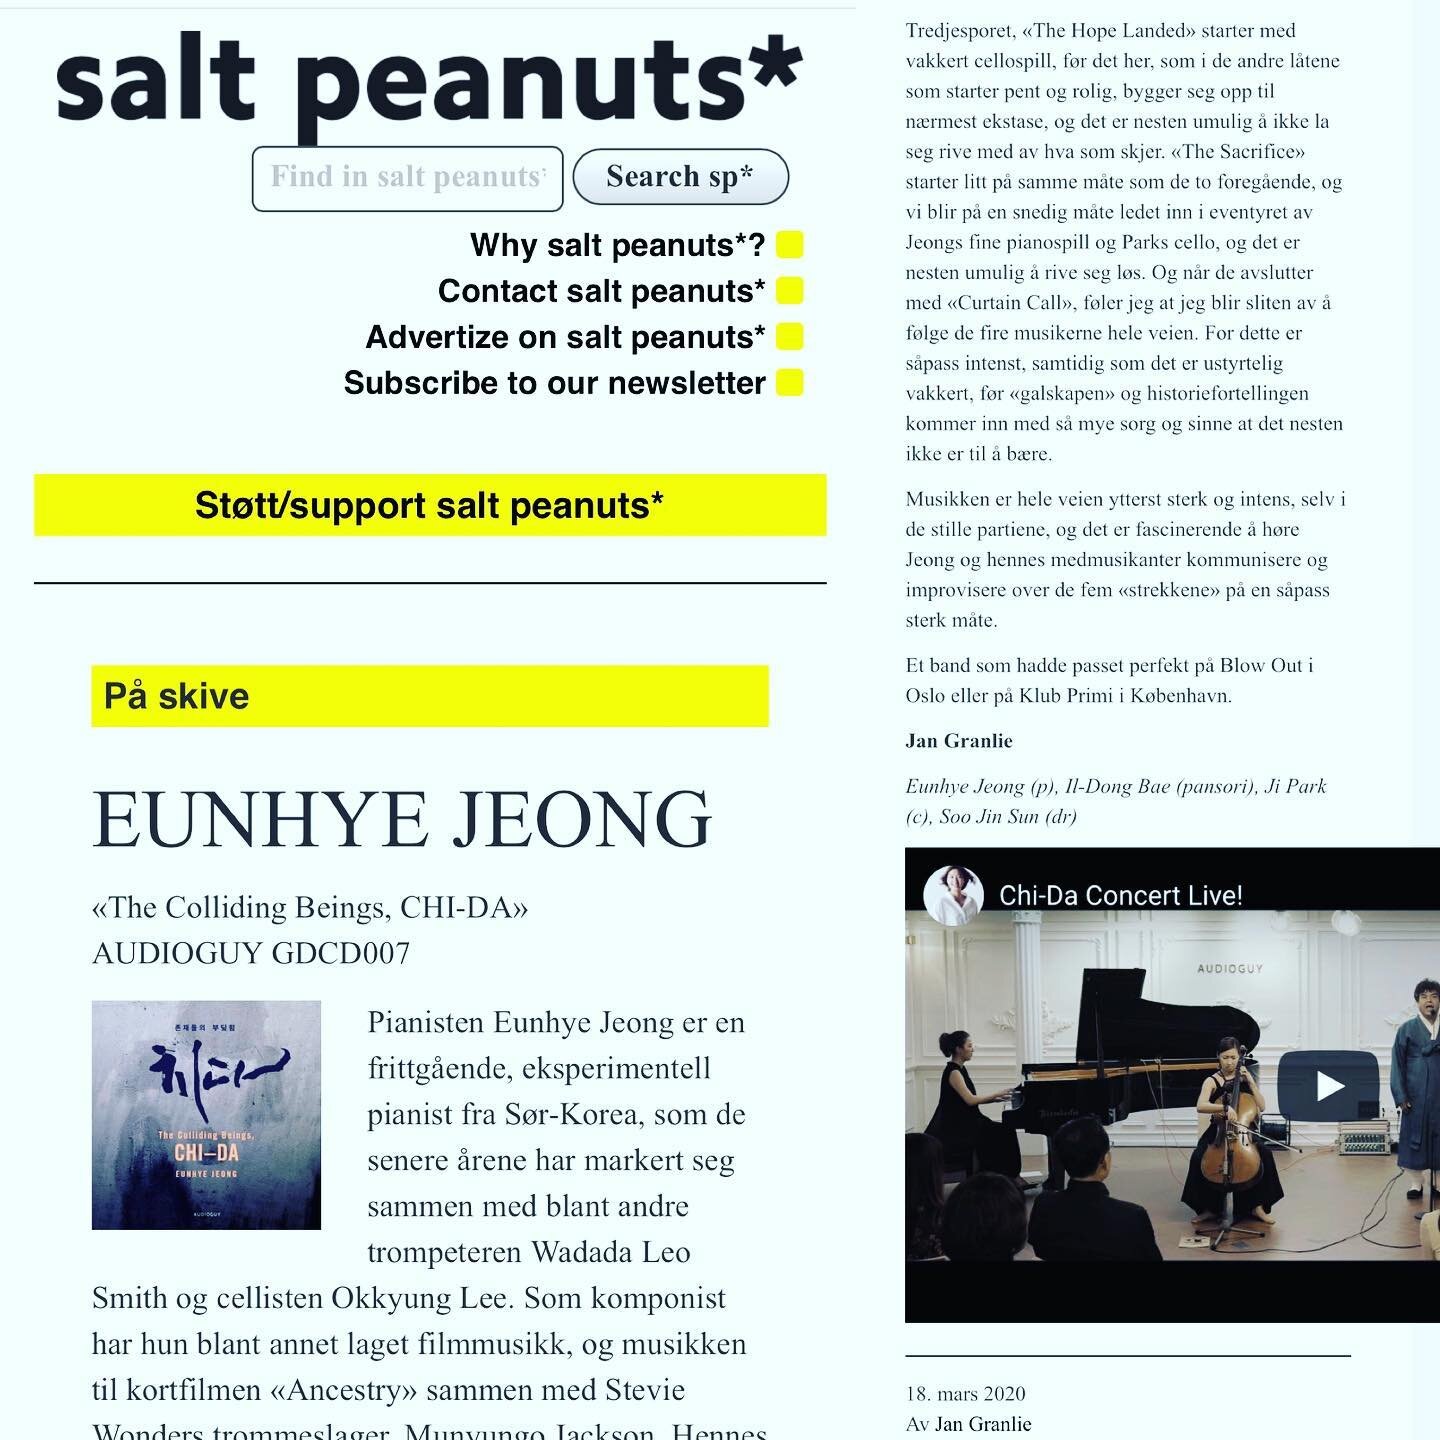 Only now I&rsquo;ve found a review of my &lt;&lt;The Colliding Beings, Chi-Da&gt;&gt; album in a Norwegian magazine &ldquo;Salt Peanuts&rdquo; published in March! (Googling my name to dig data on me led to this discovery. Funny I google myself but I 